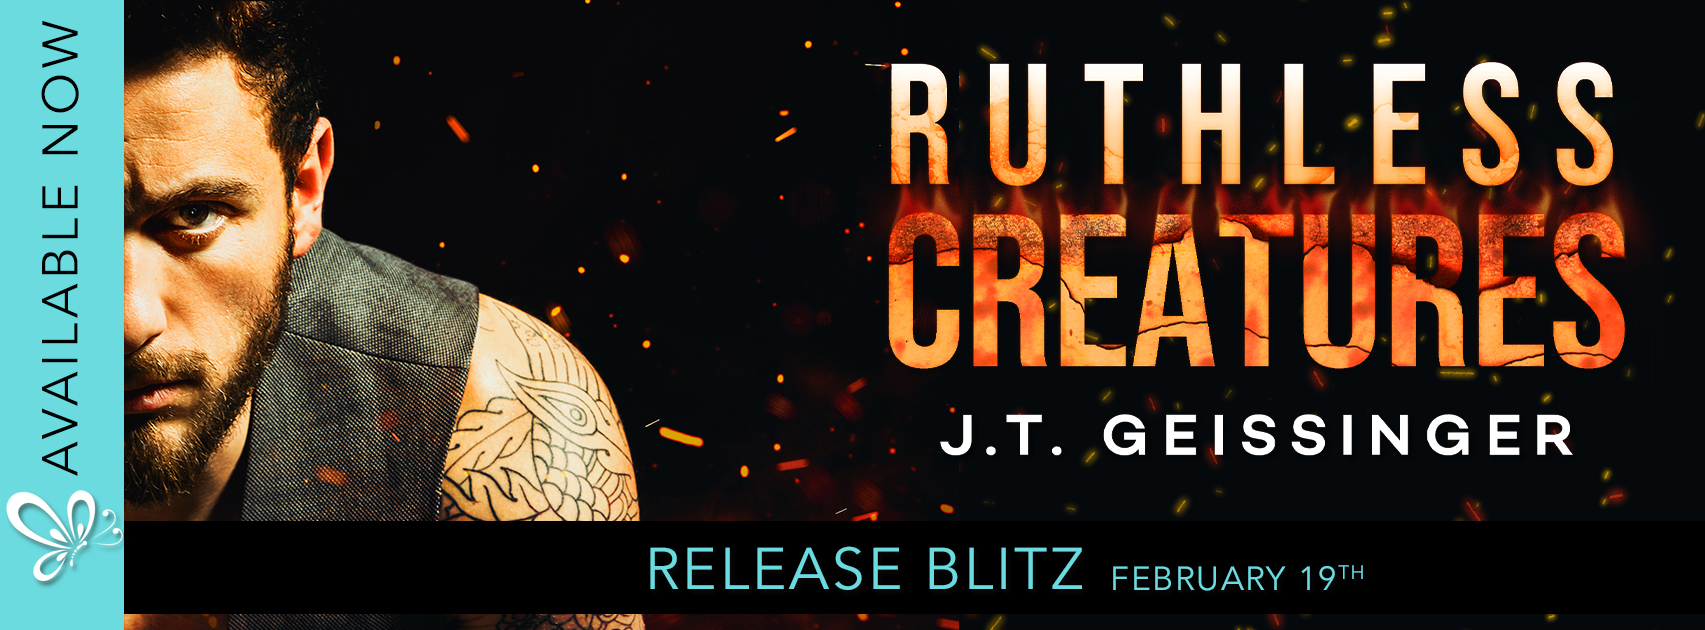 ruthless creatures book